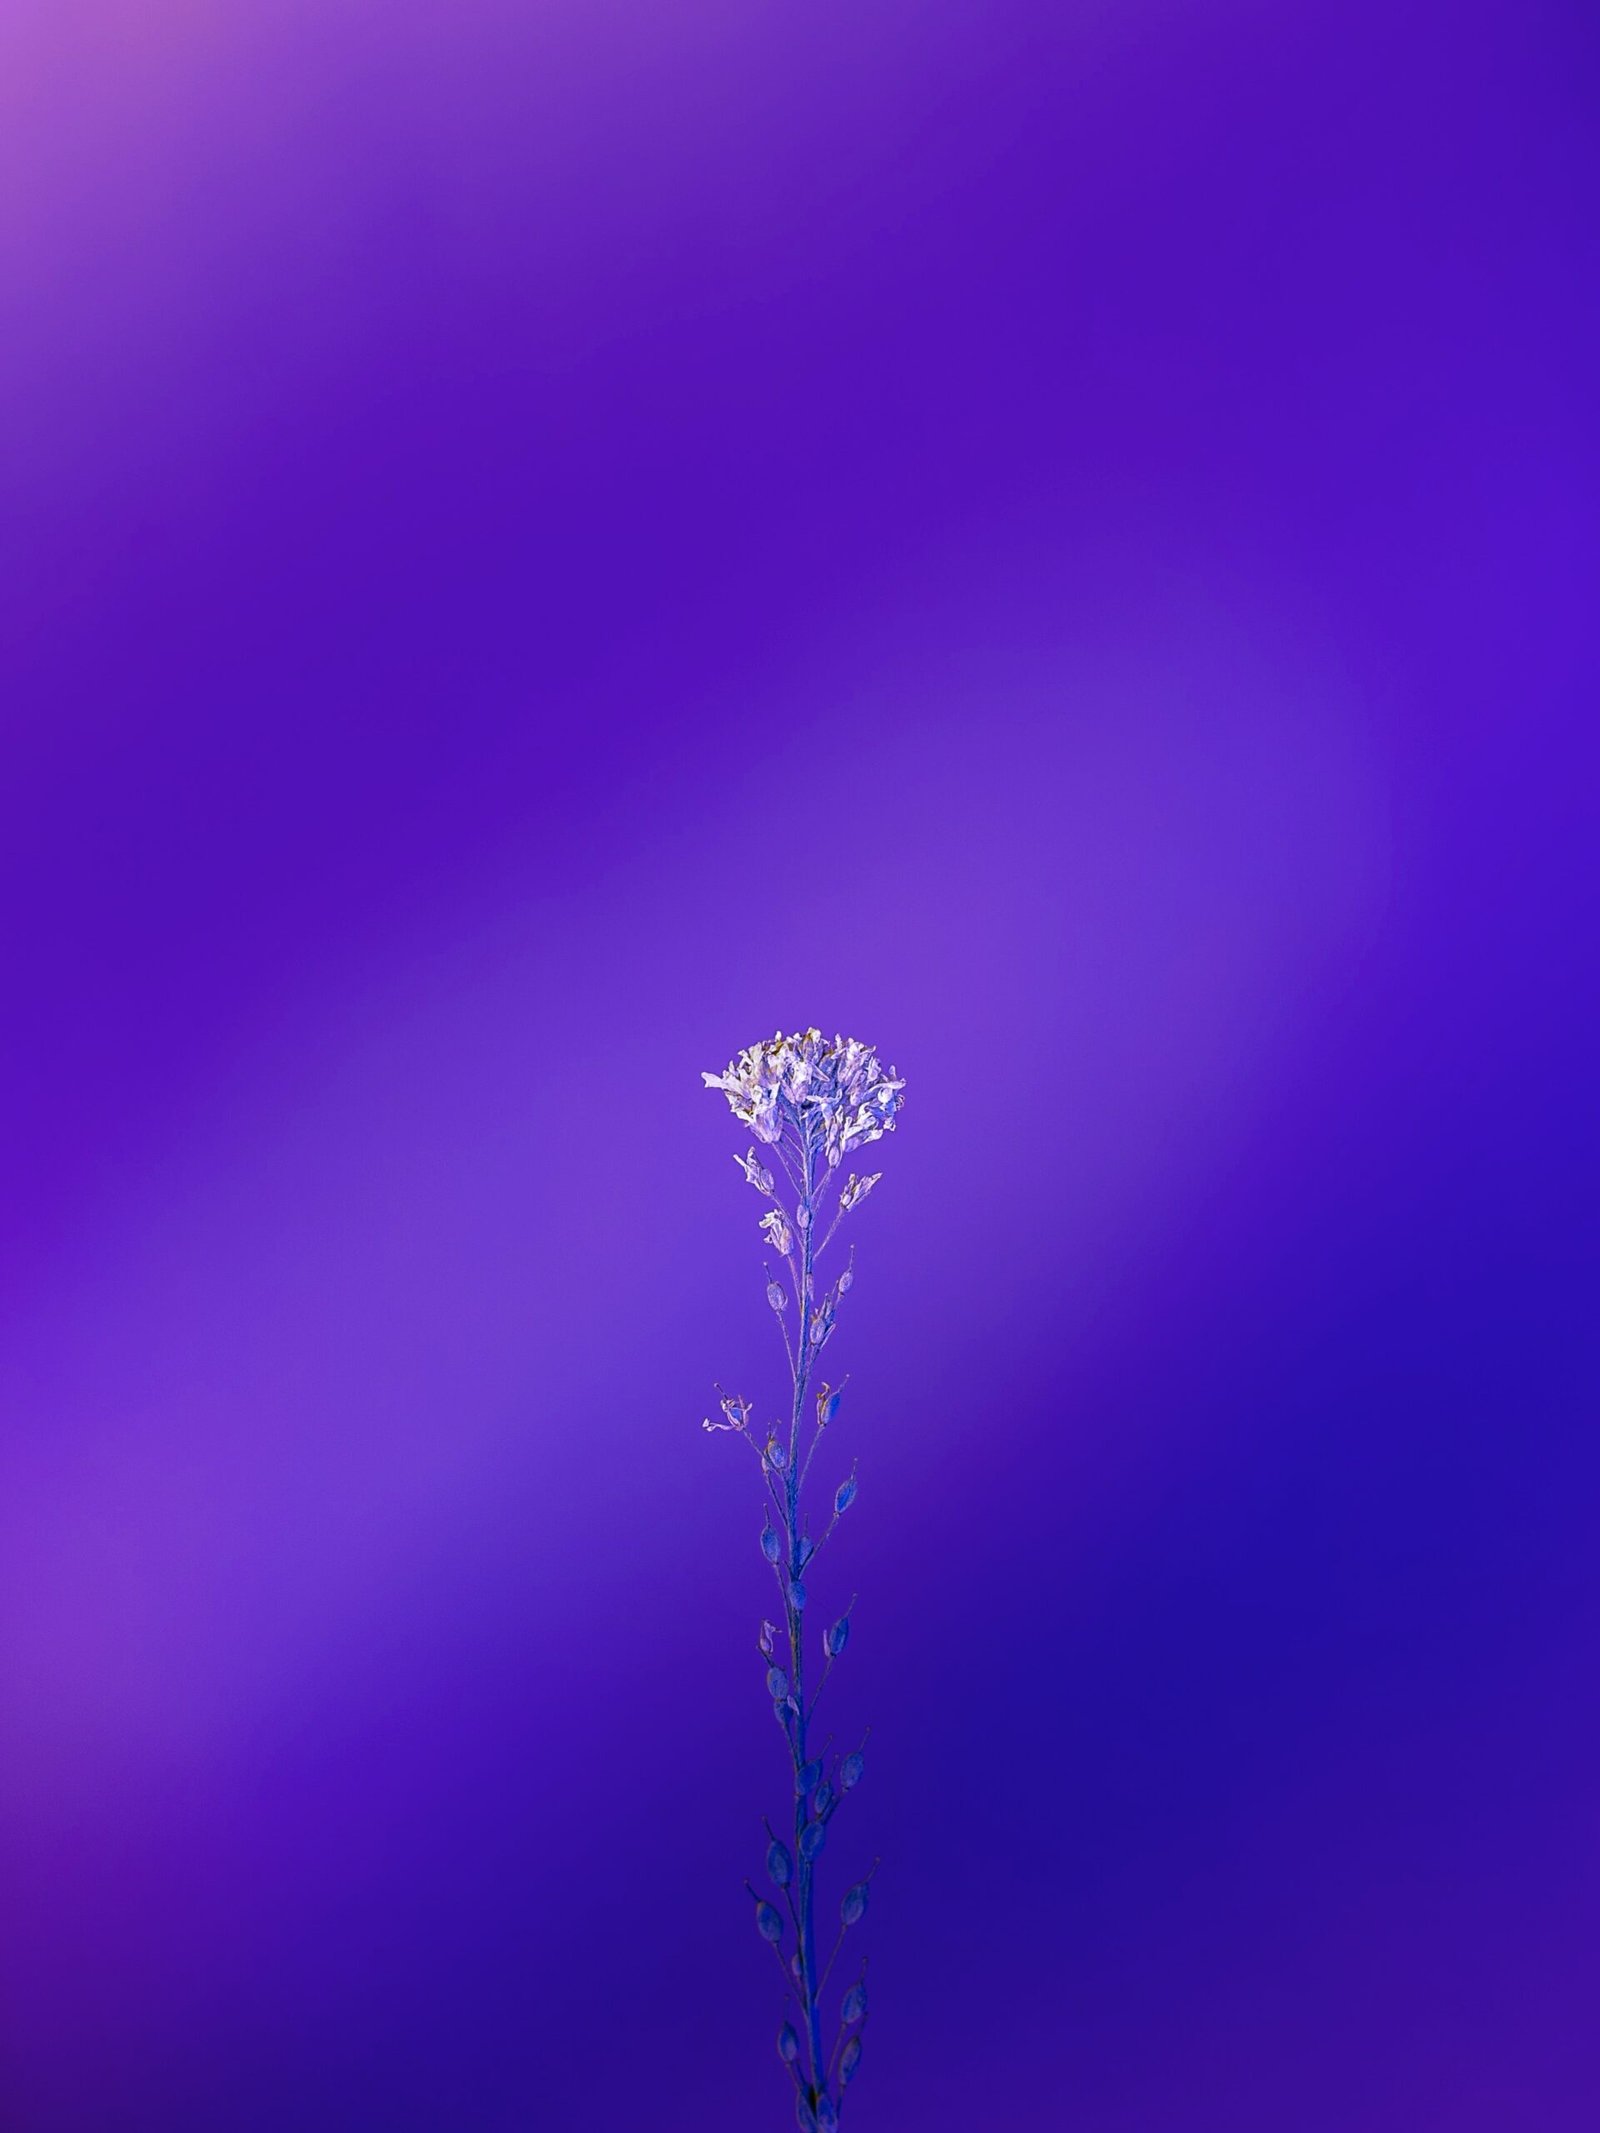 Blue And Purple Wallpaper